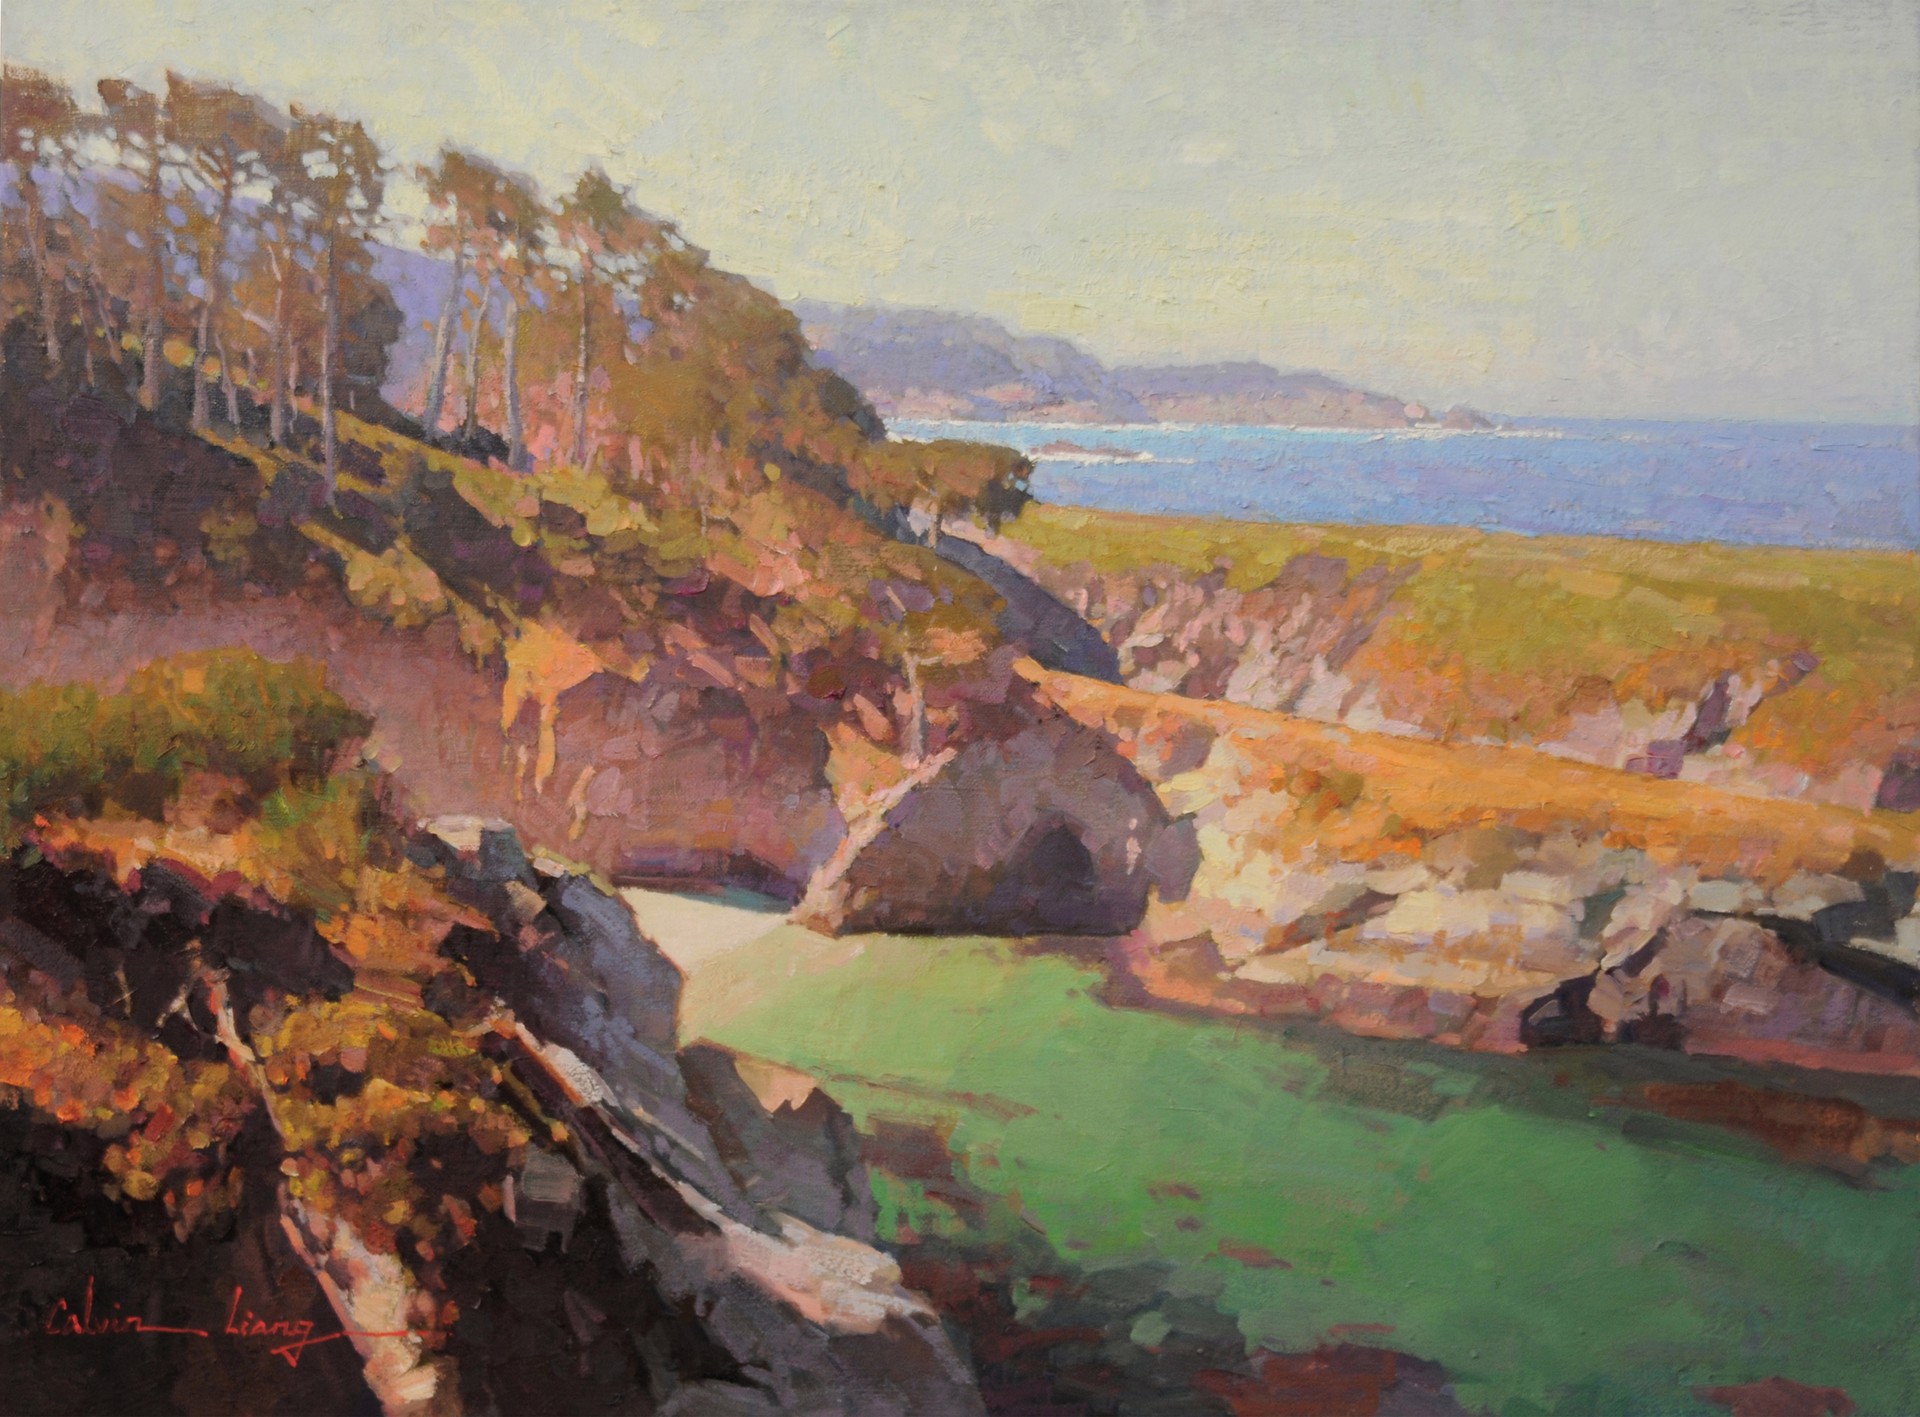 A View from Point Lobos Carmel - AWARD WINNER - AWARD OF EXCELLENCE by Calvin Liang